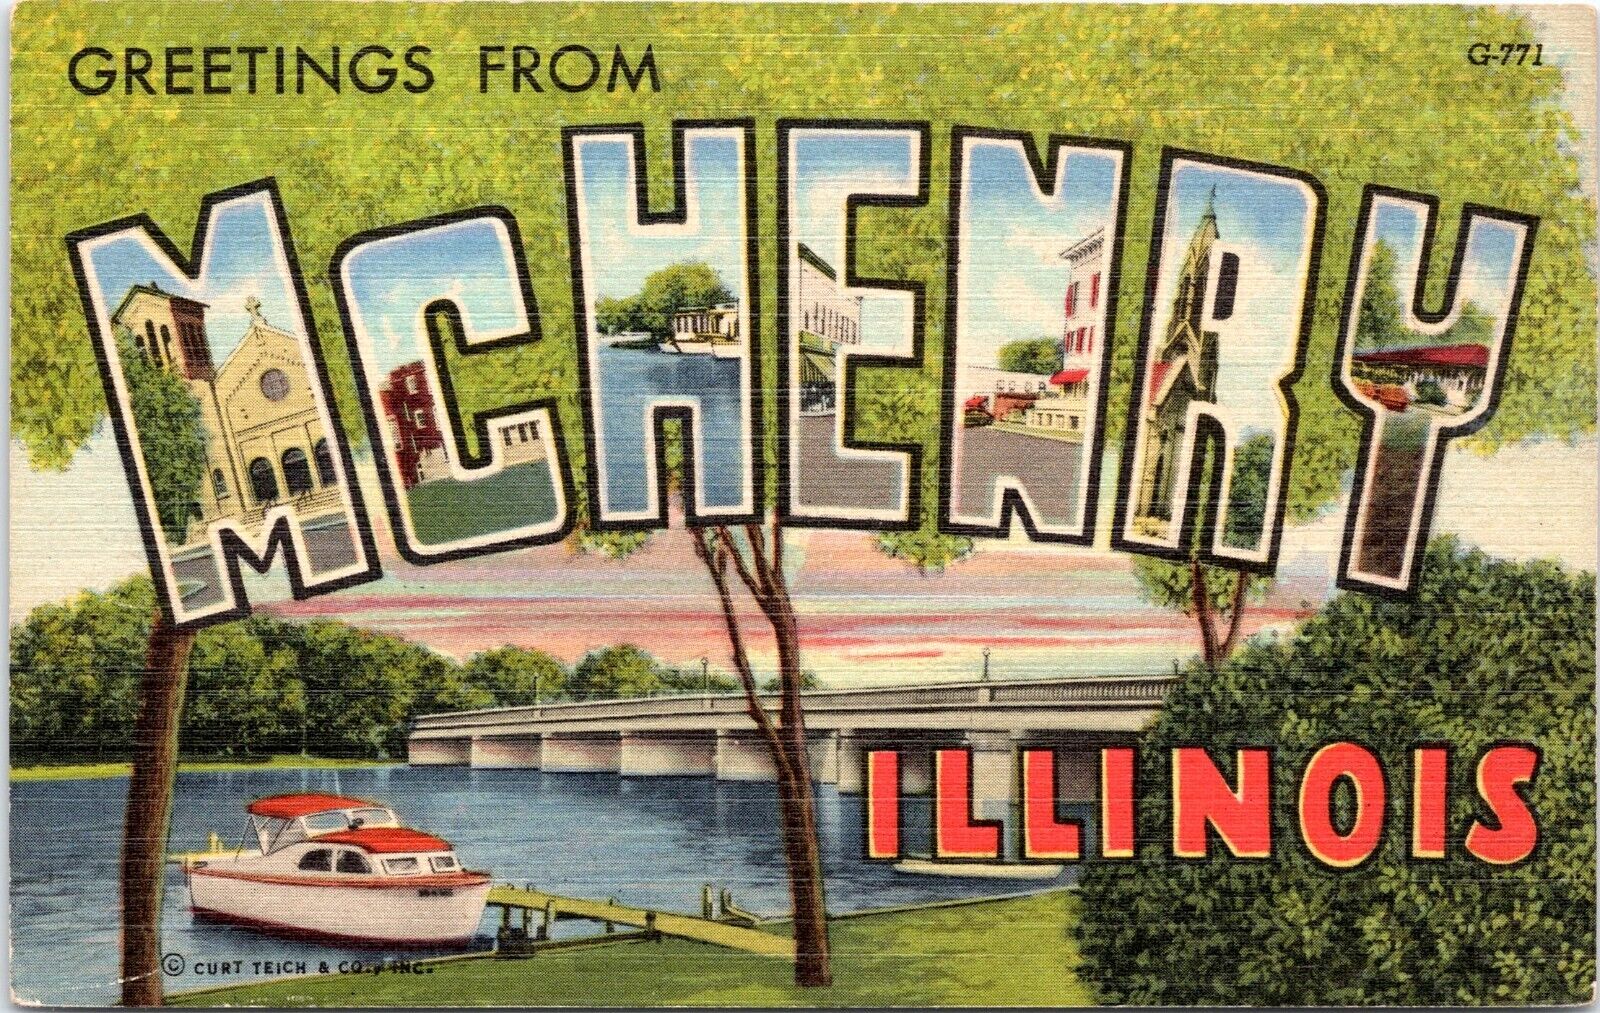 Large Letter Greetings, McHenry, Illinois - 1951 Linen Postcard - Curt Teich